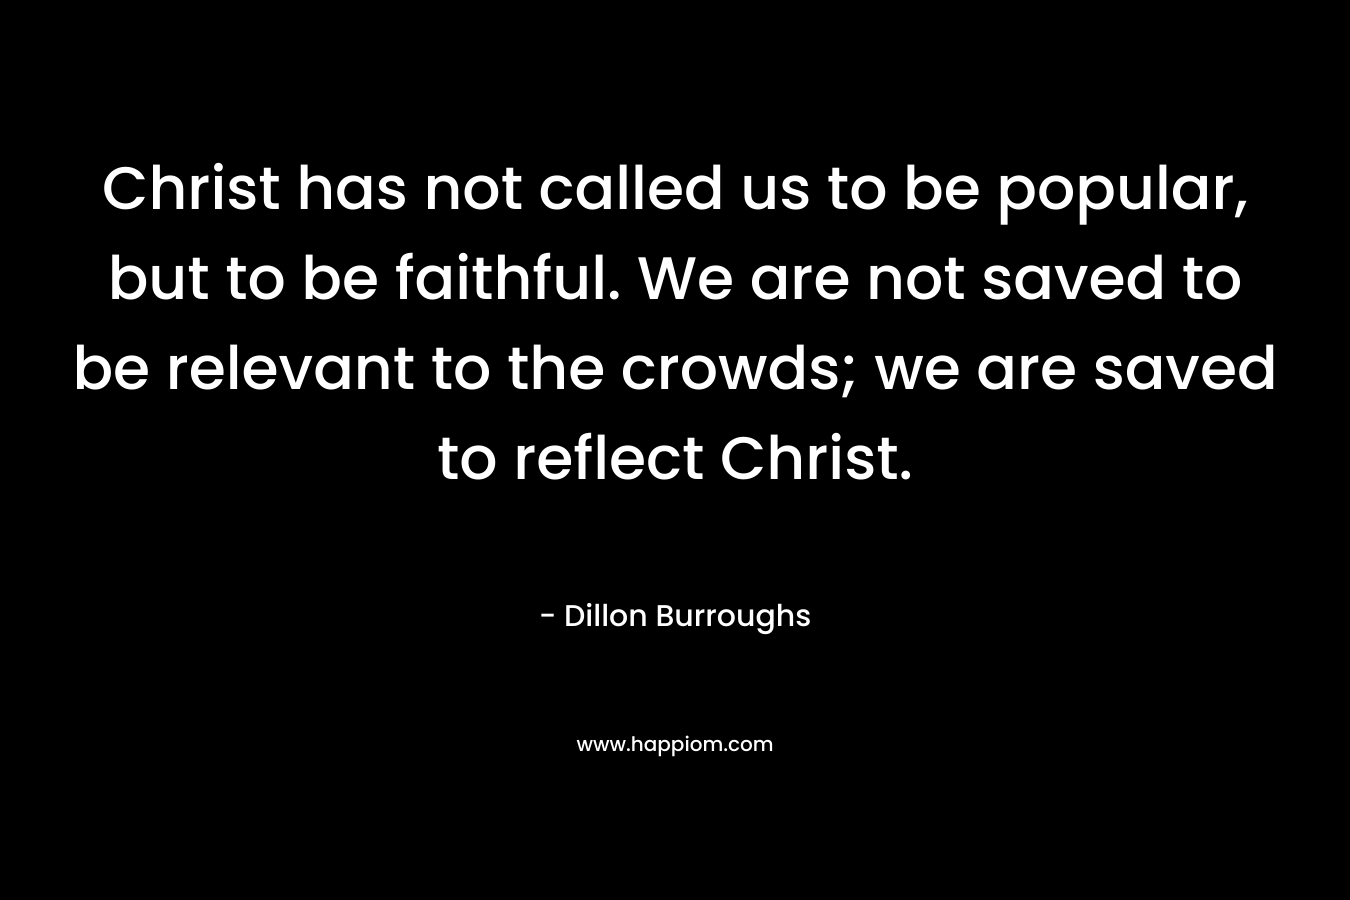 Christ has not called us to be popular, but to be faithful. We are not saved to be relevant to the crowds; we are saved to reflect Christ.